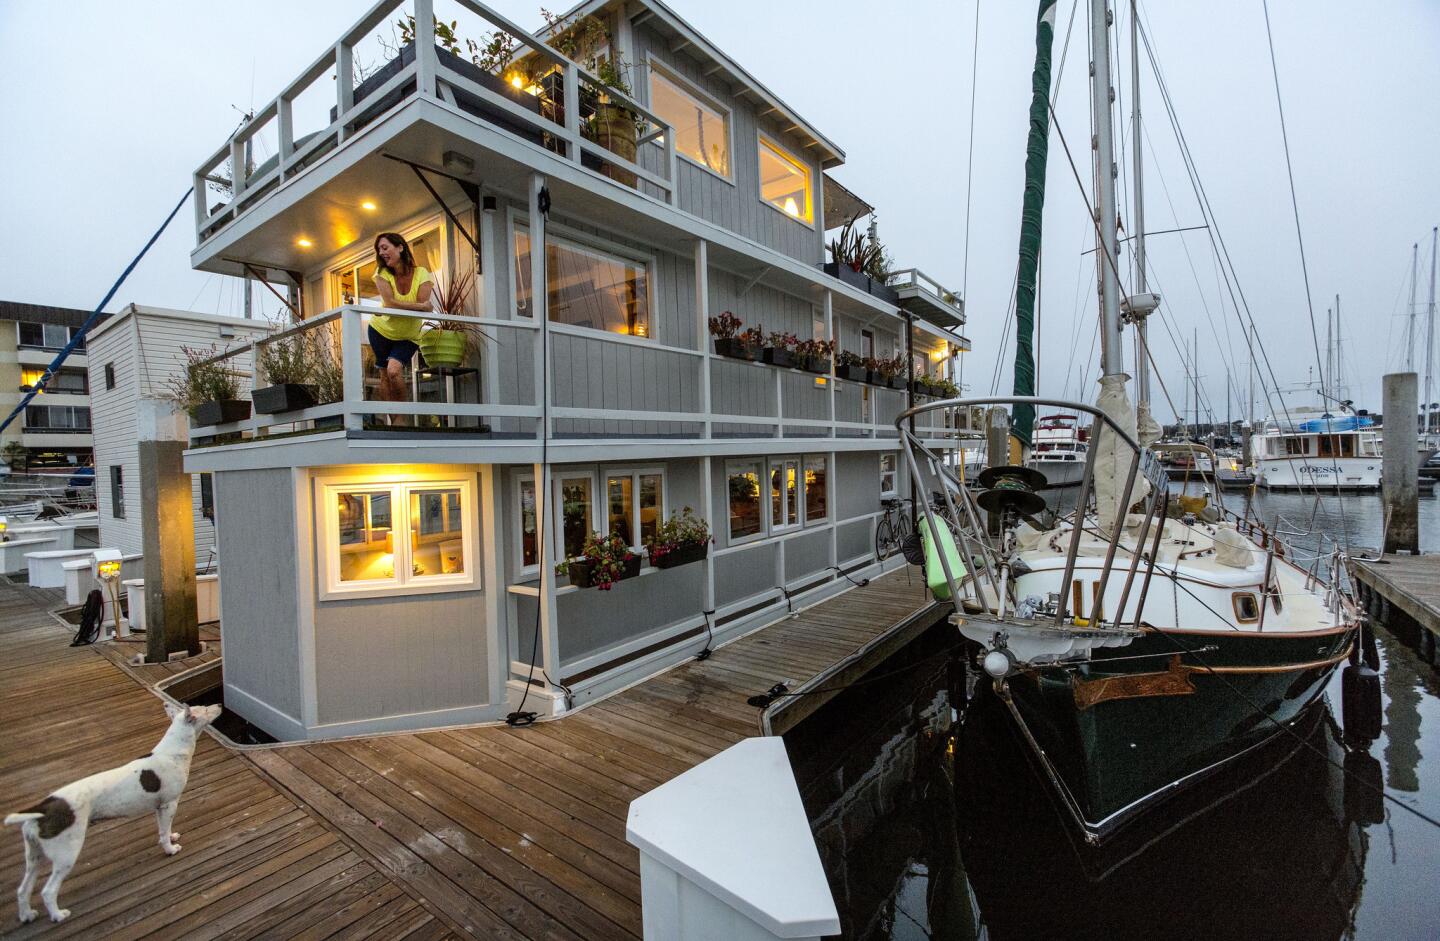 The houseboat remodel